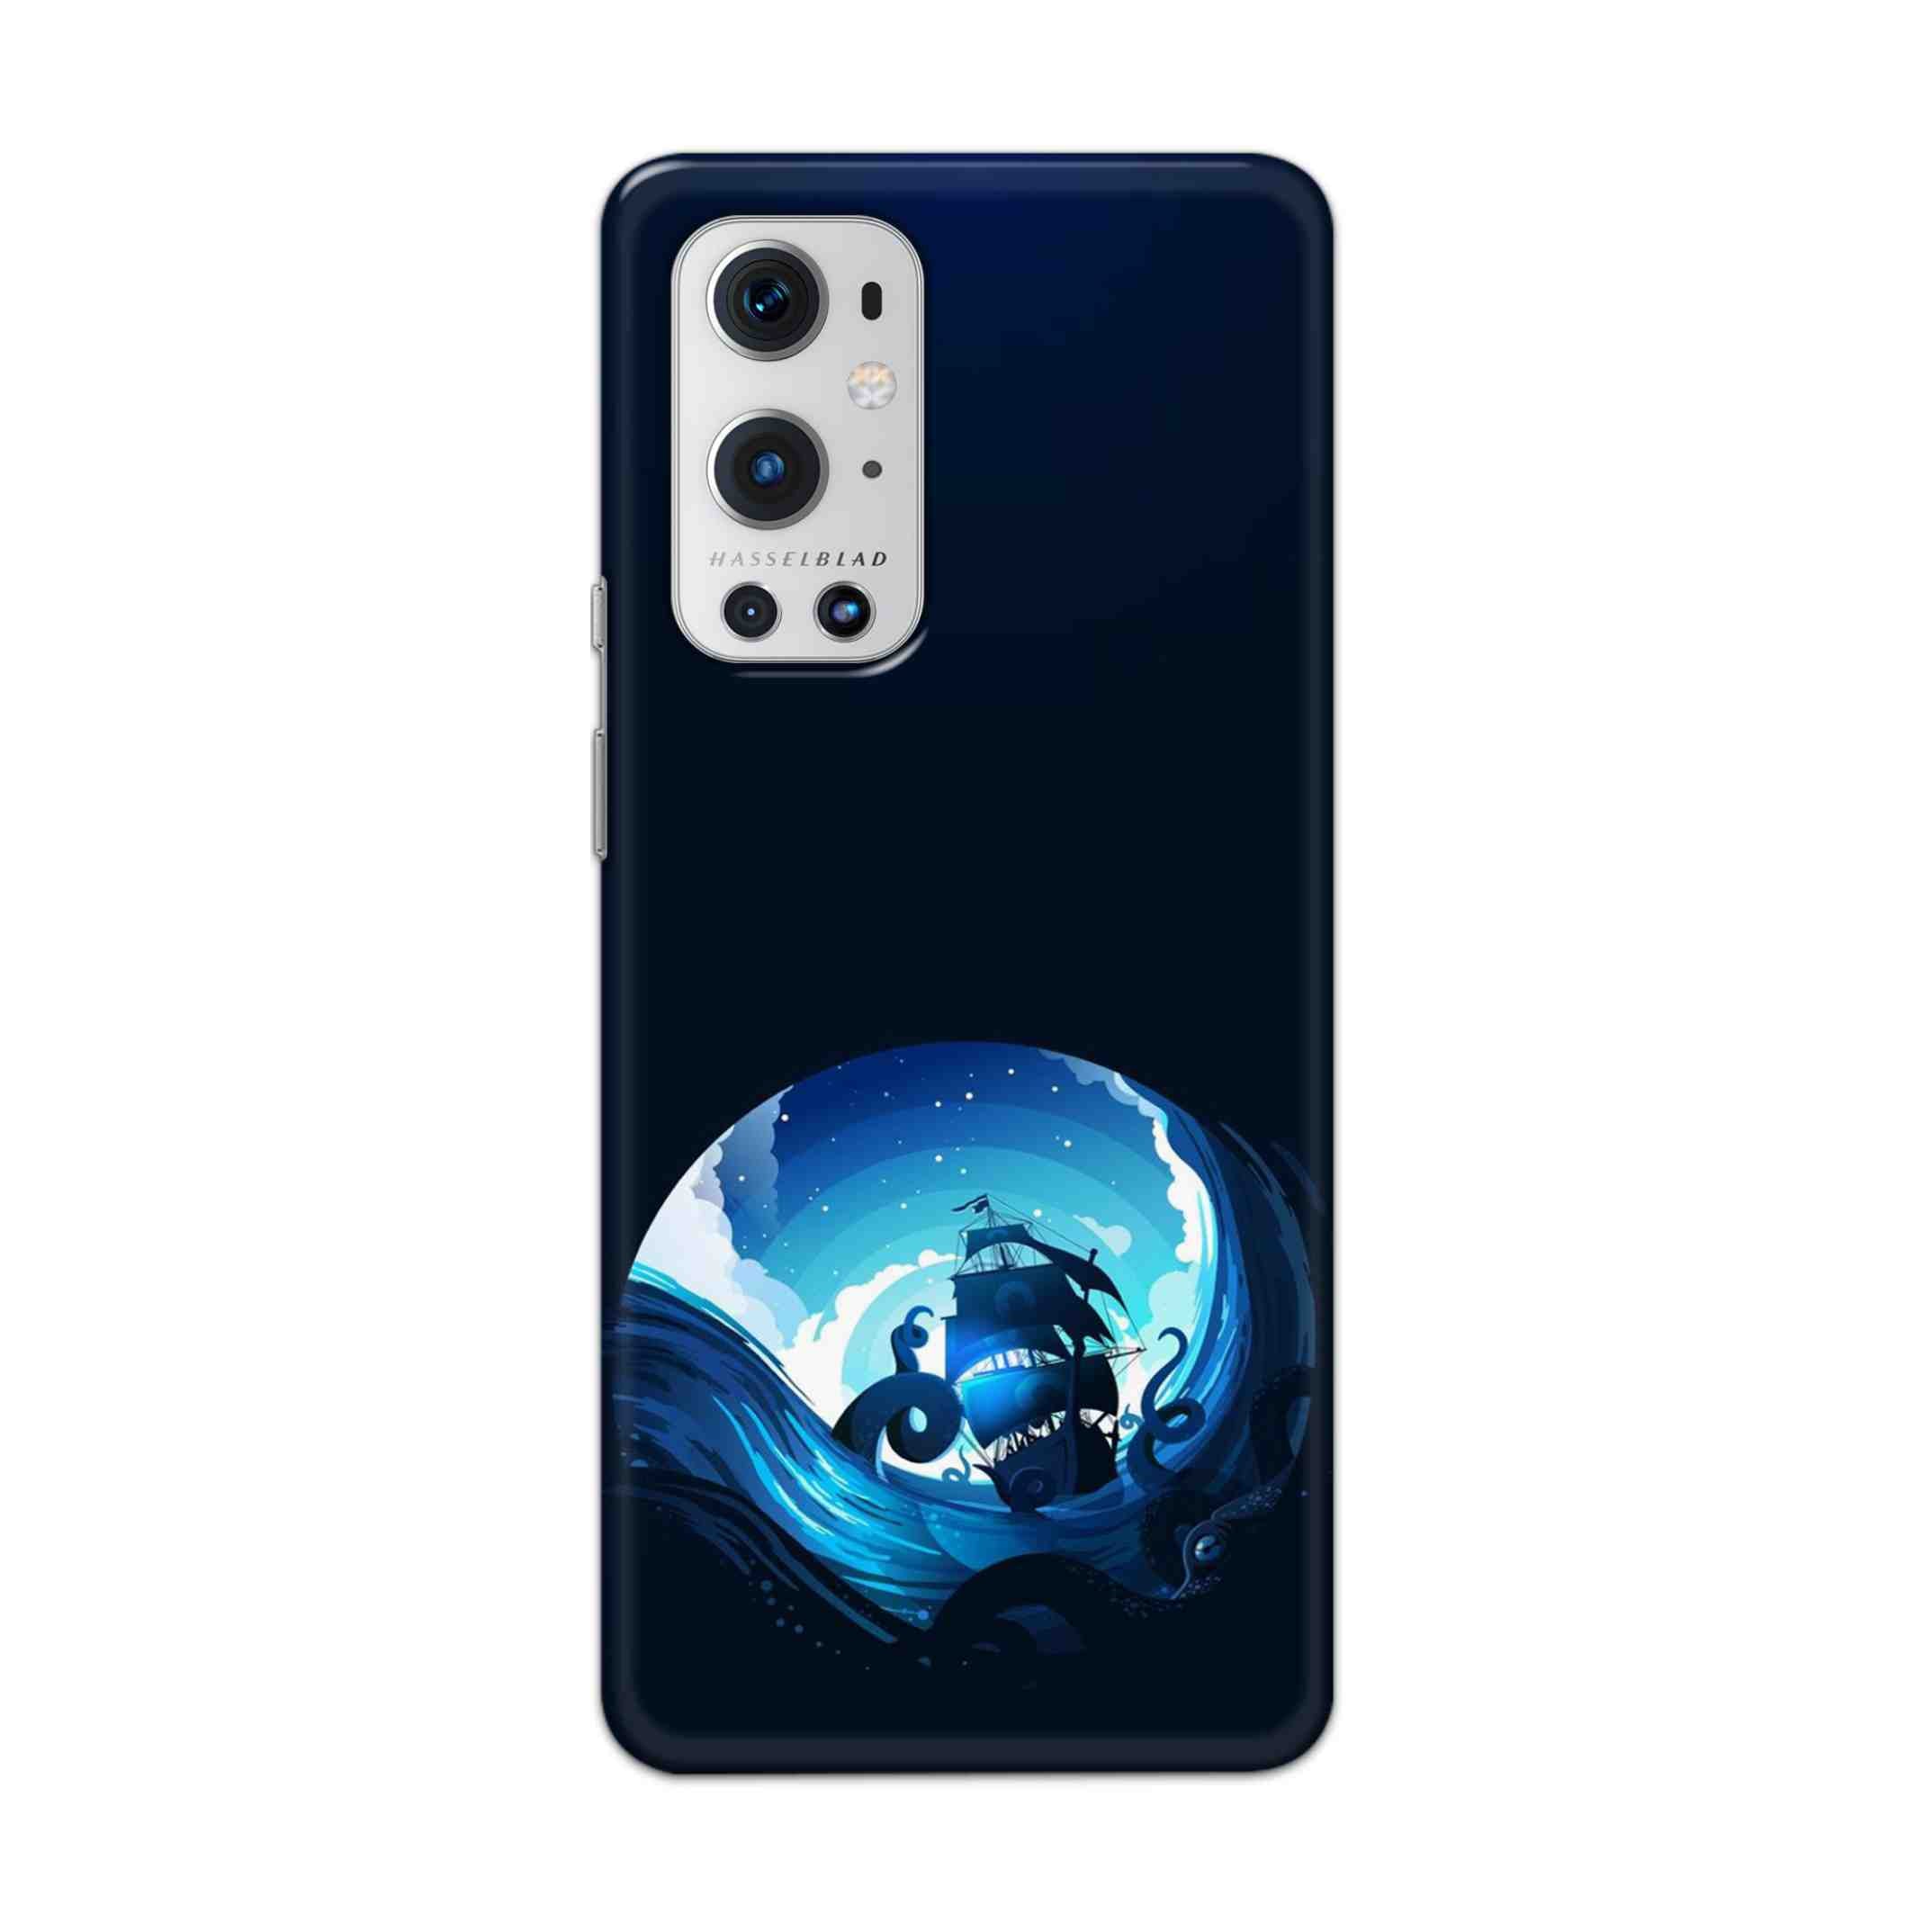 Buy Blue Sea Ship Hard Back Mobile Phone Case Cover For OnePlus 9 Pro Online